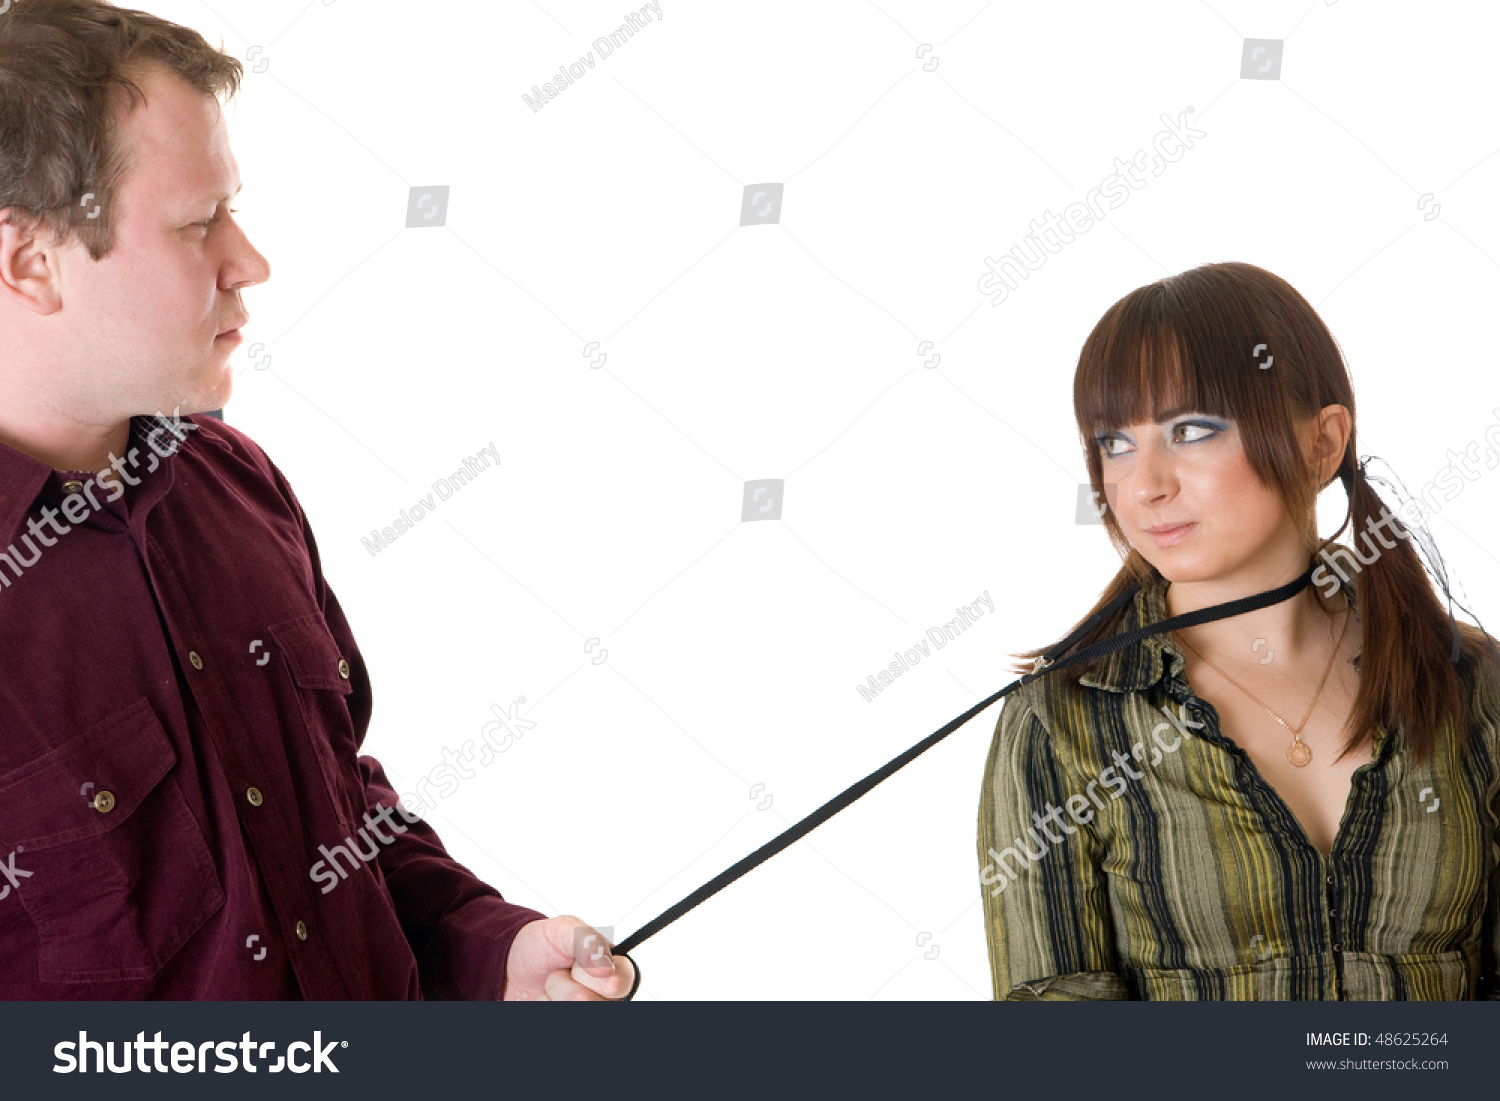 Image result for woman on leash